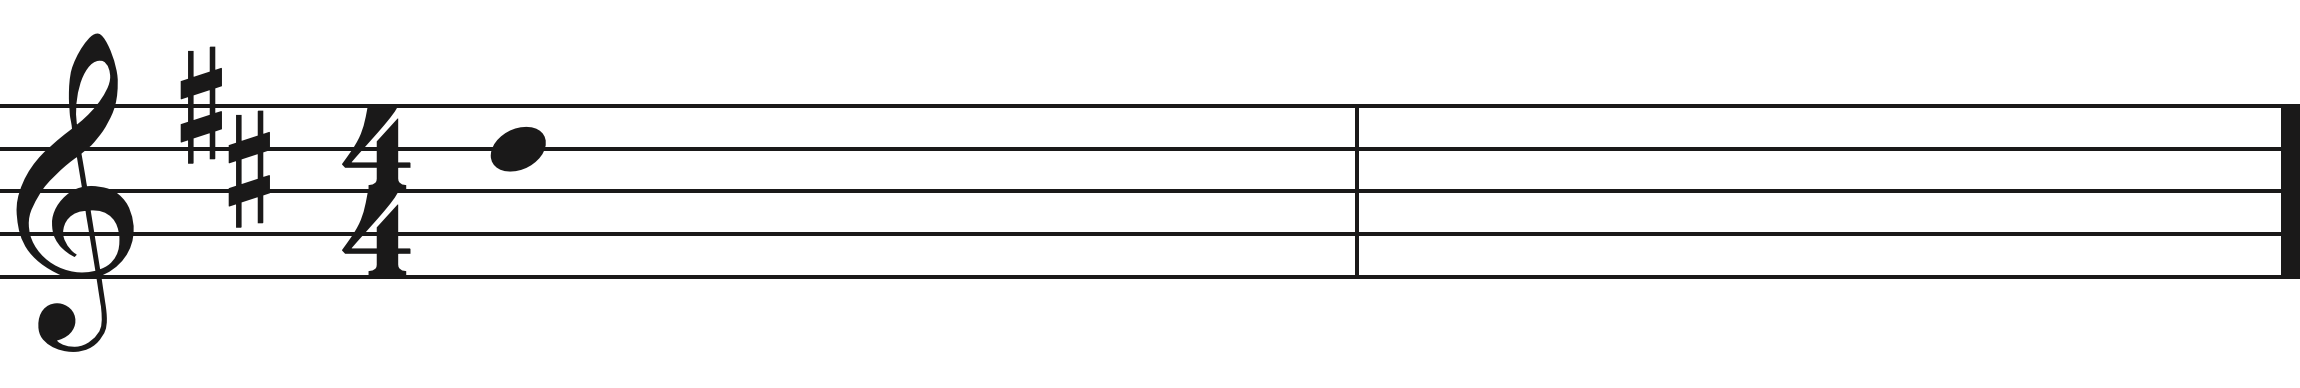 Melodic Sequences Aural Training exercise example3